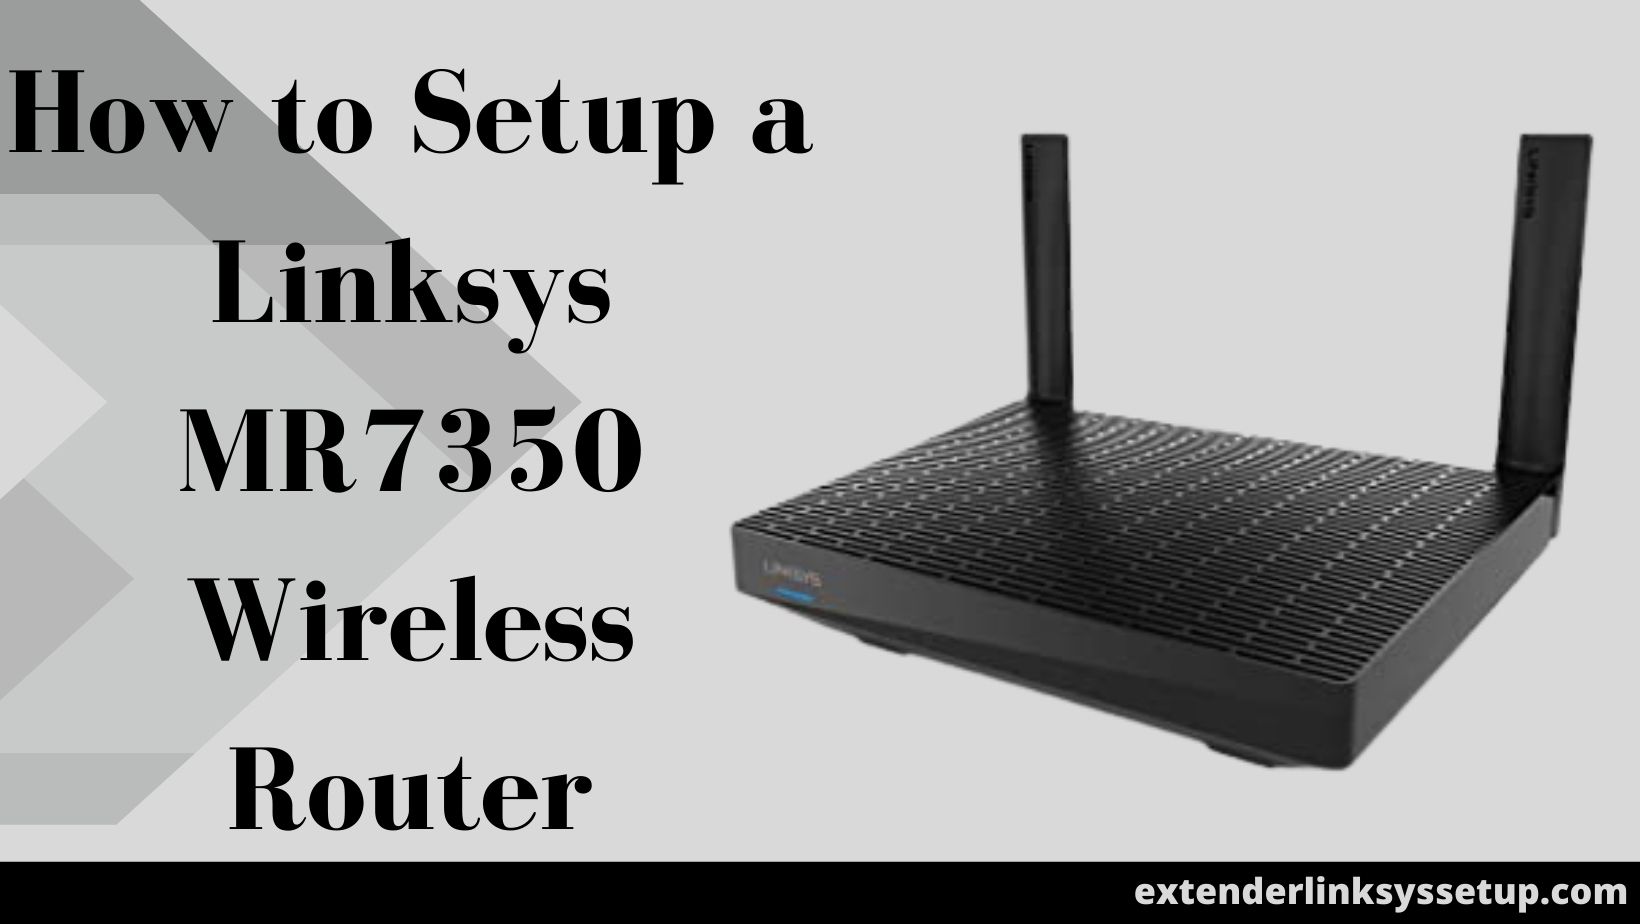 How to Setup a Linksys MR7350 Wireless Router